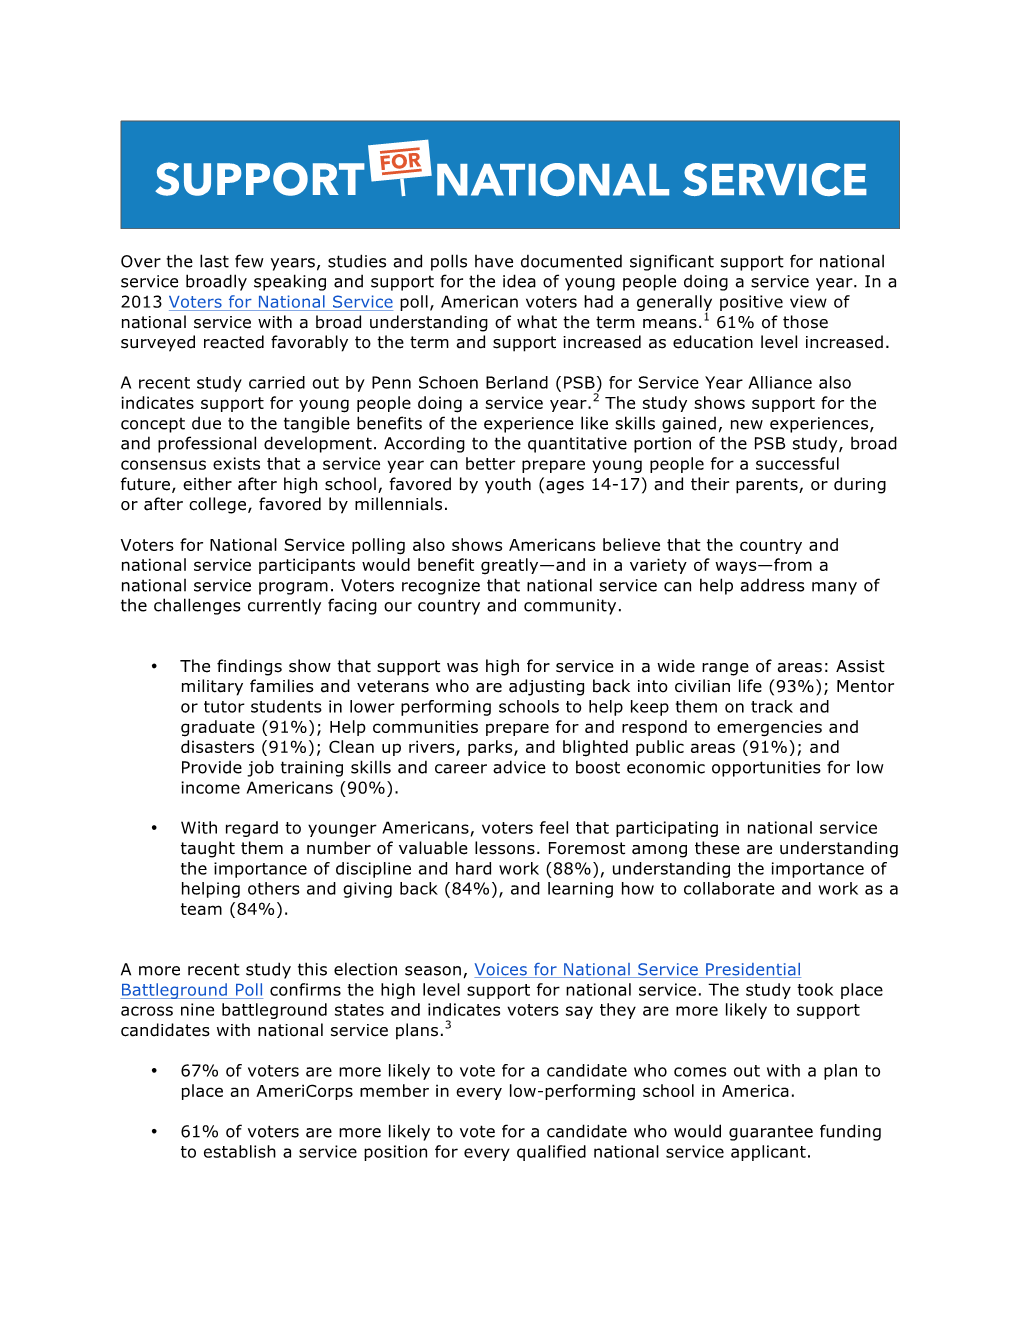 Over the Last Few Years, Studies and Polls Have Documented Significant Support for National Service Broadly Speaking and Support